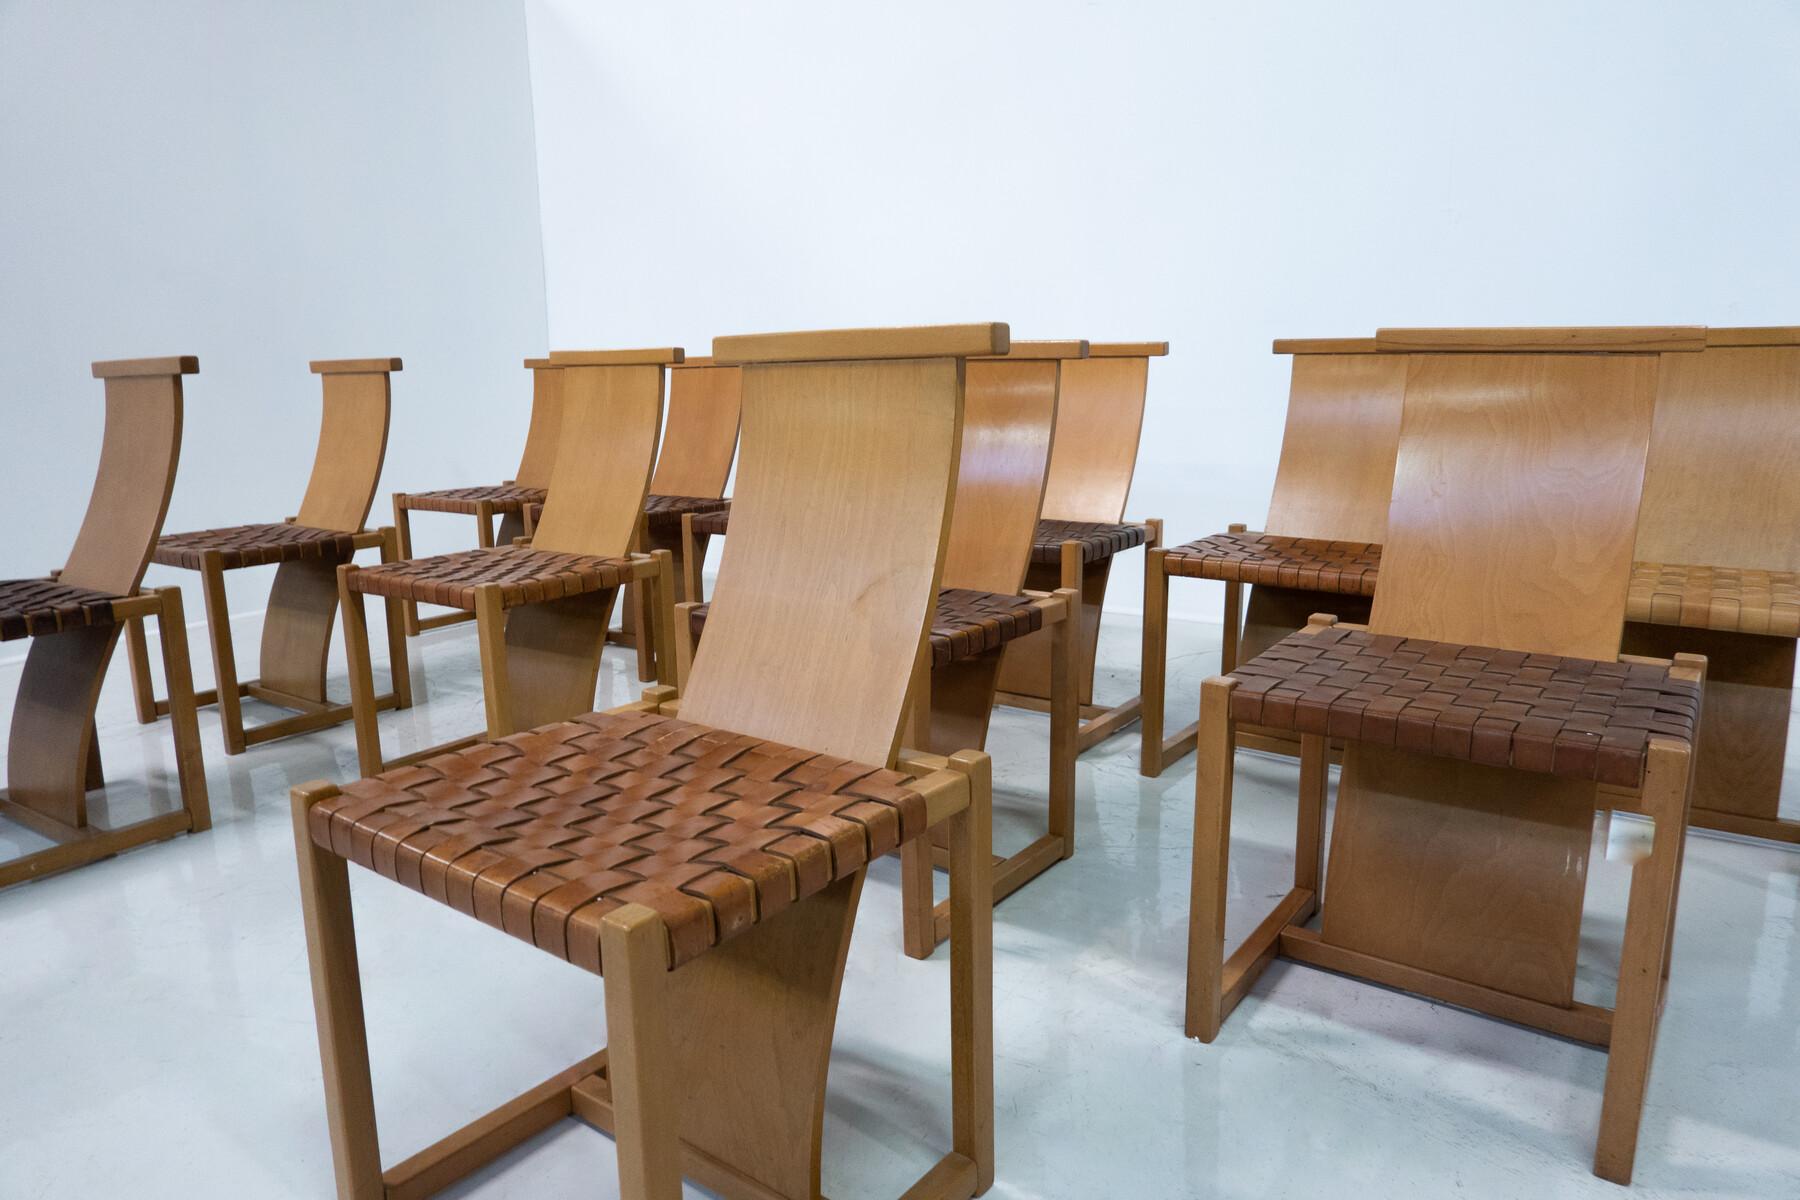 Mid-20th Century Mid-Century Modern Set of 12 Wood and Leather Chairs, Italy, 1950s For Sale